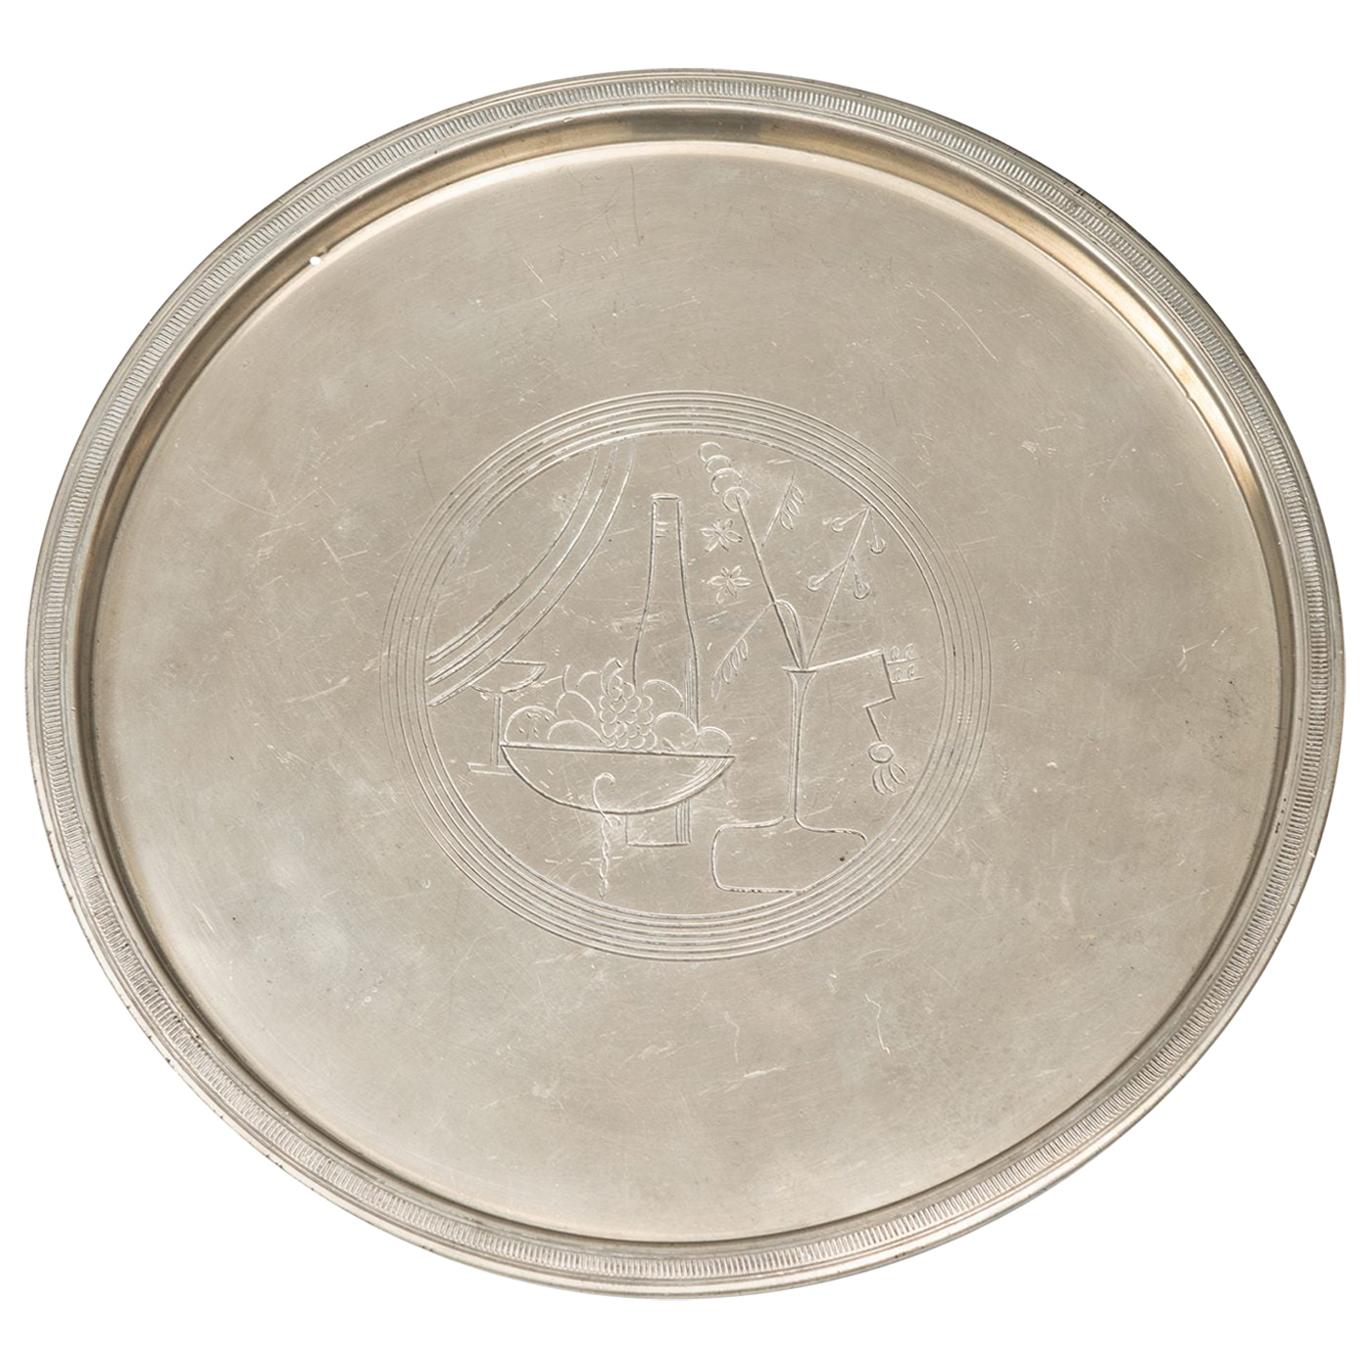 Sylvia Stave Serving Tray Produced by C.G. Hallberg in Sweden